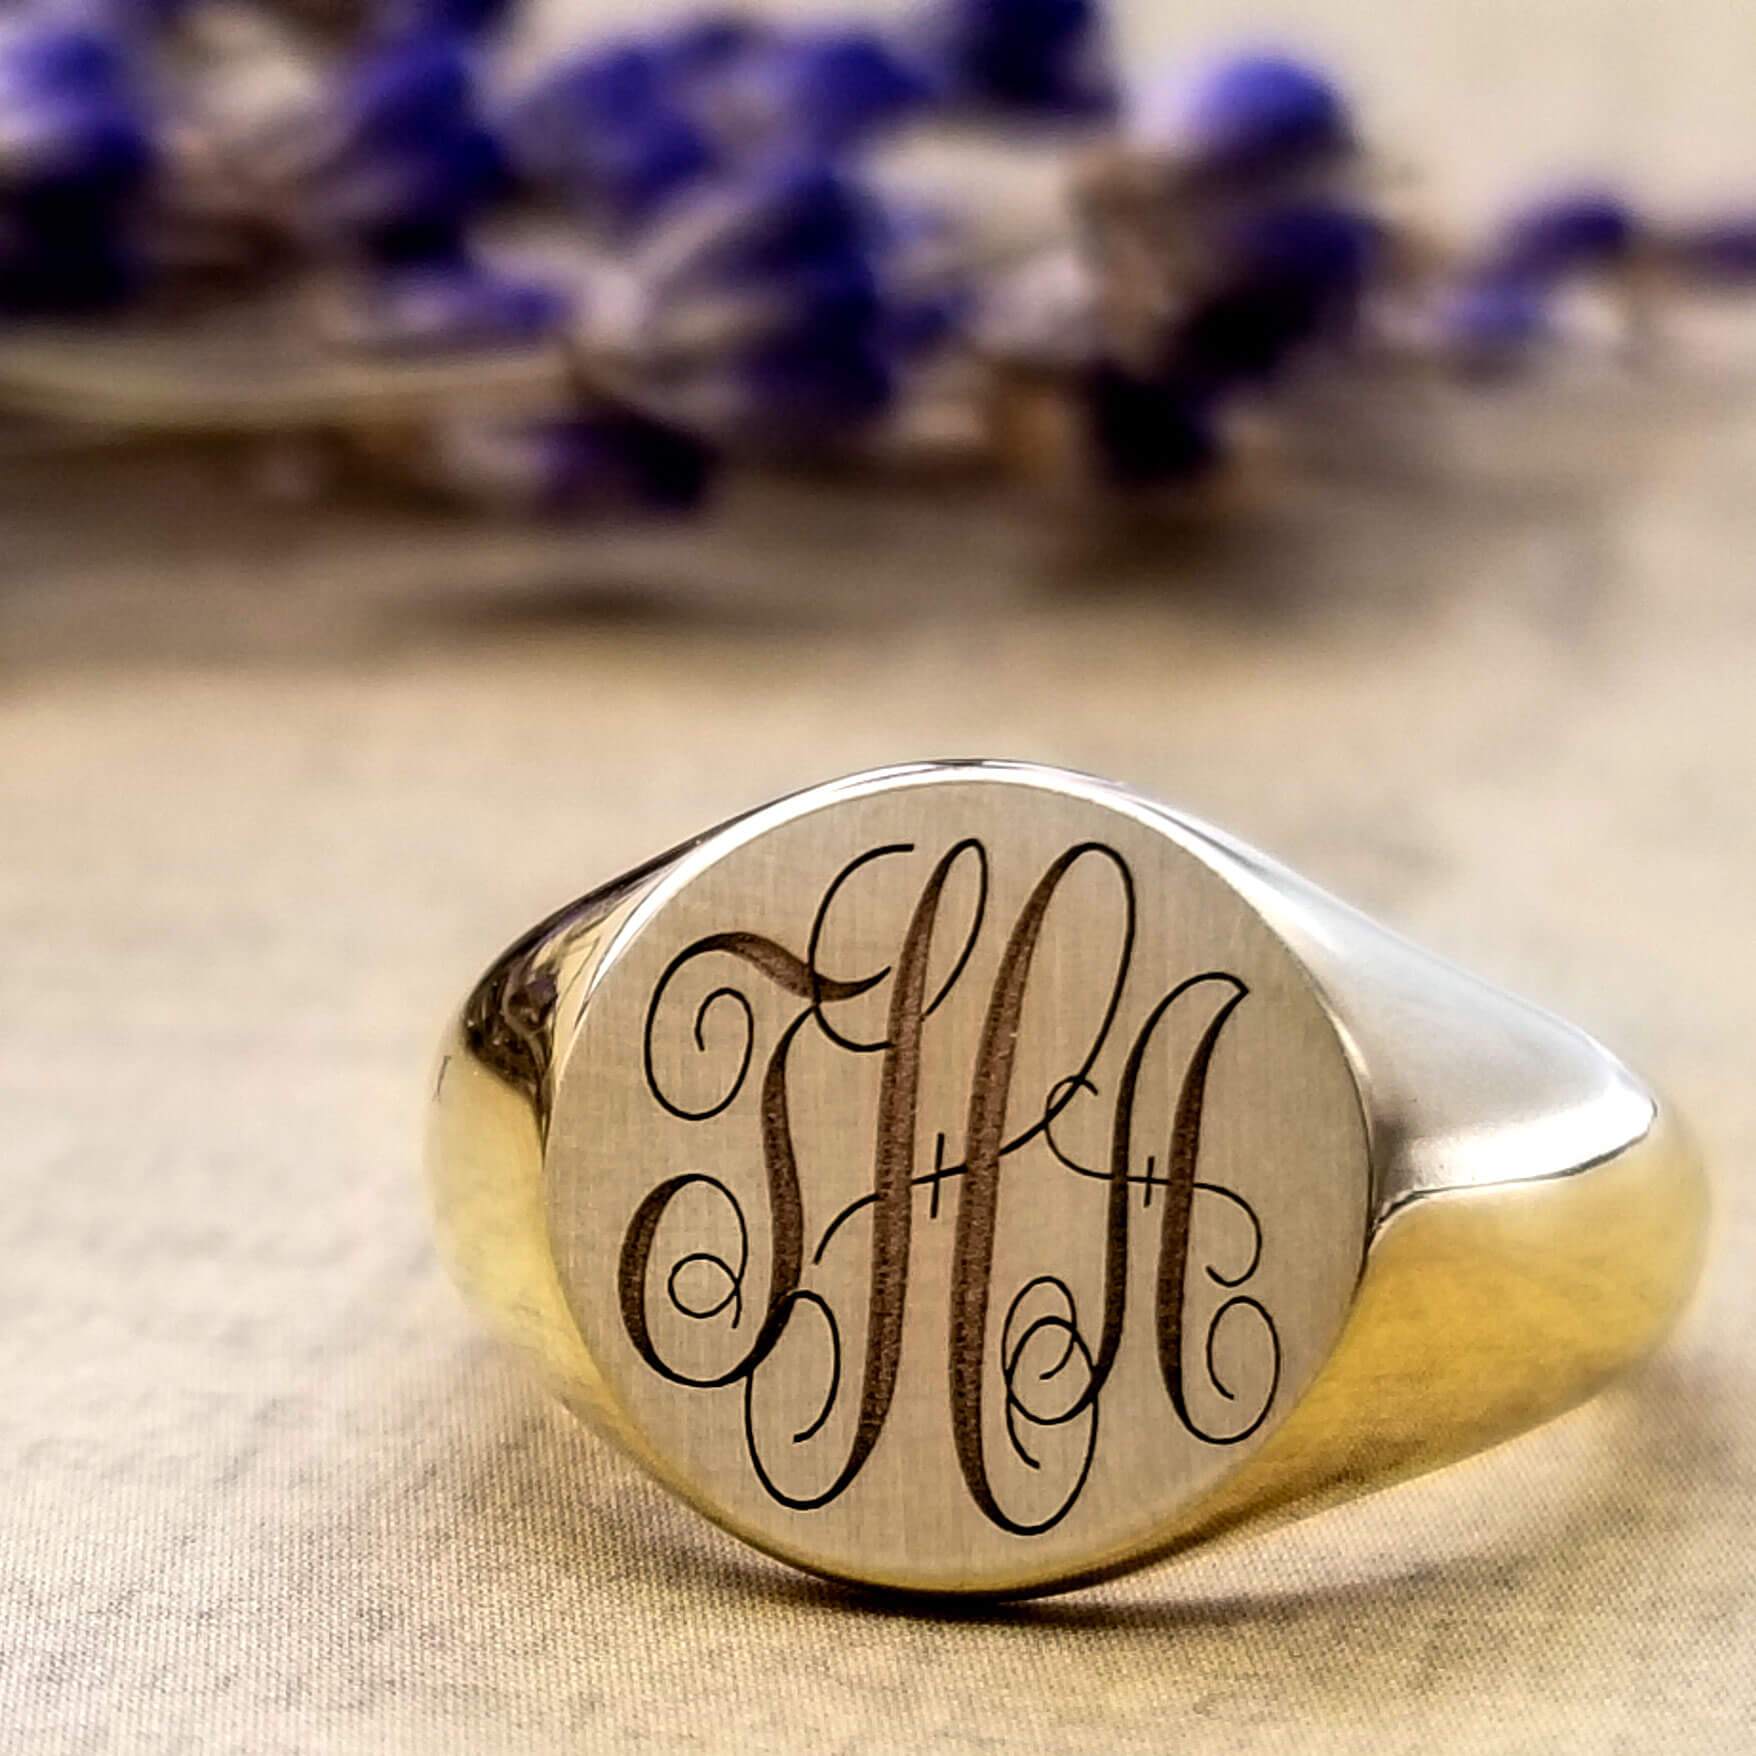 Initials & Diamonds Signet Ring - Solid Gold, Signet ring, Monogram Ring, Initial Ring, Diamond